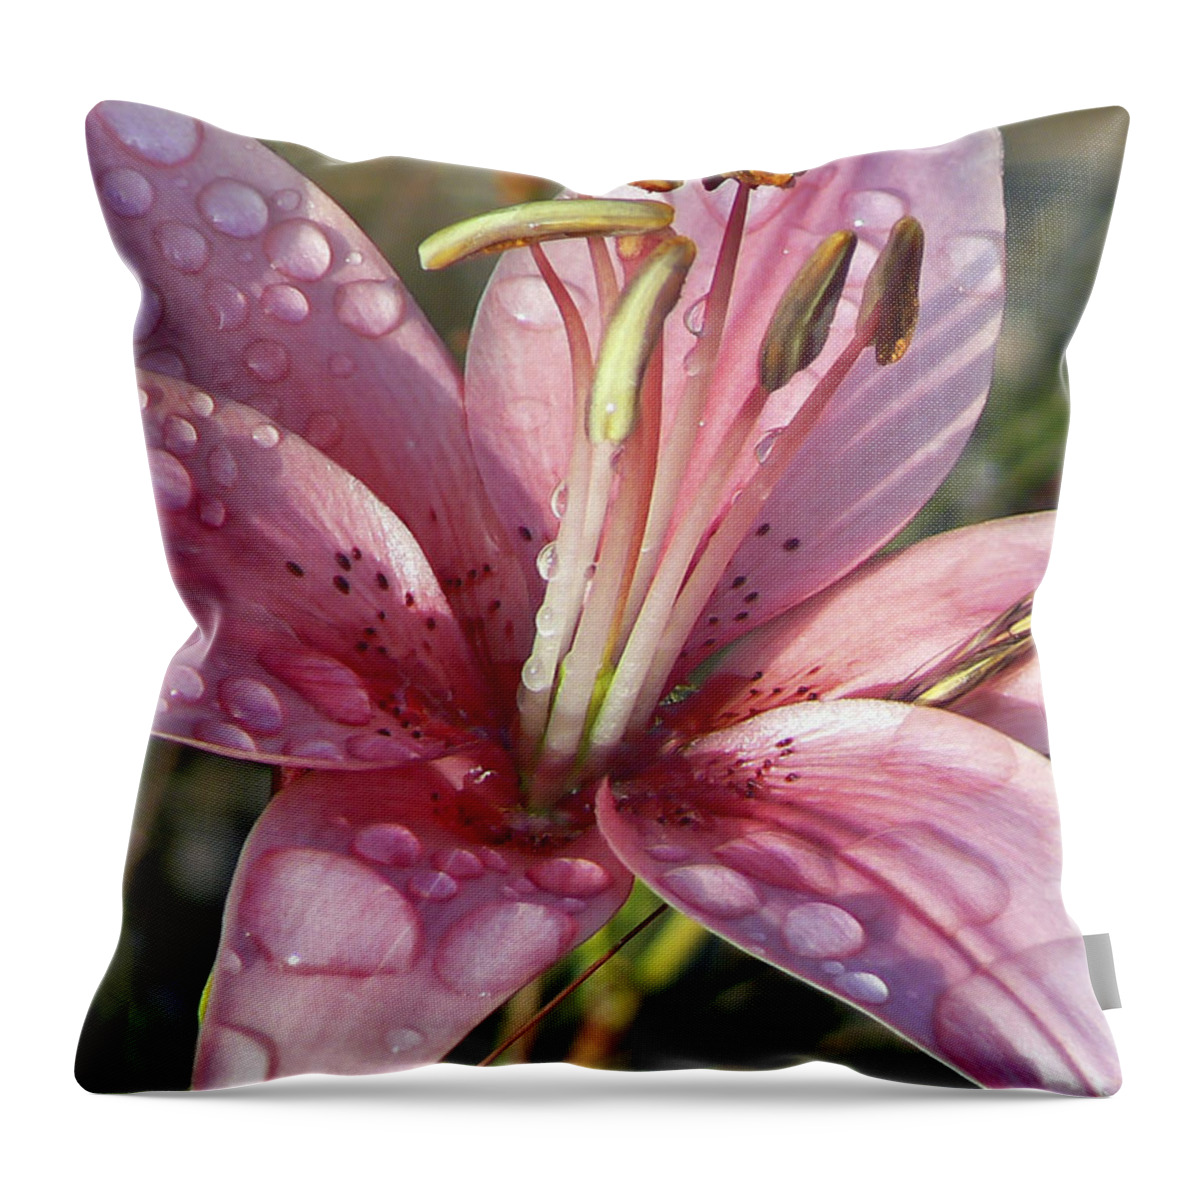 Pamela Patch Throw Pillow featuring the photograph Rainy Day Lily by Pamela Patch